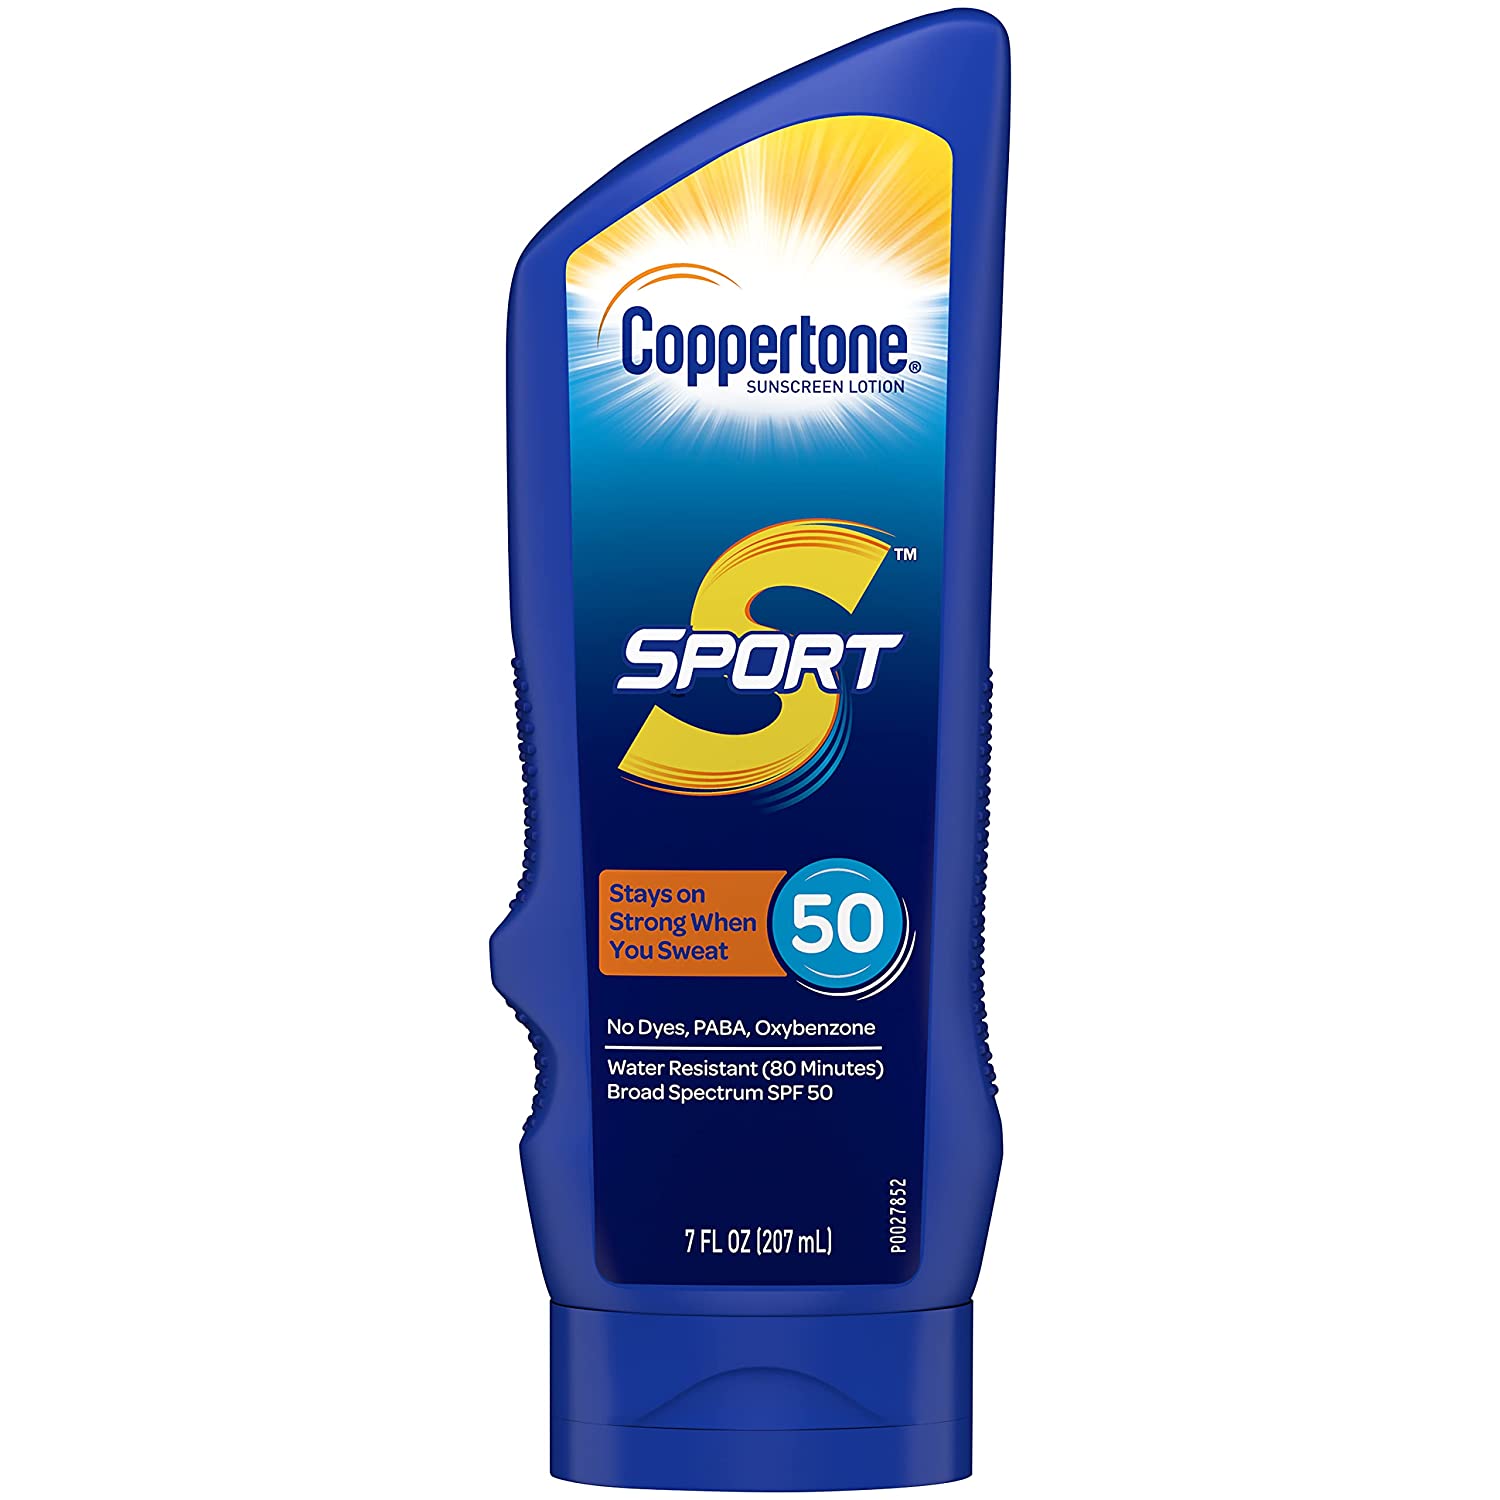 Coppertone SPORT SUNSCREEN Lotion Broad Spectrum SPF 50 (7 Fluid Ounce) (Packaging may vary)